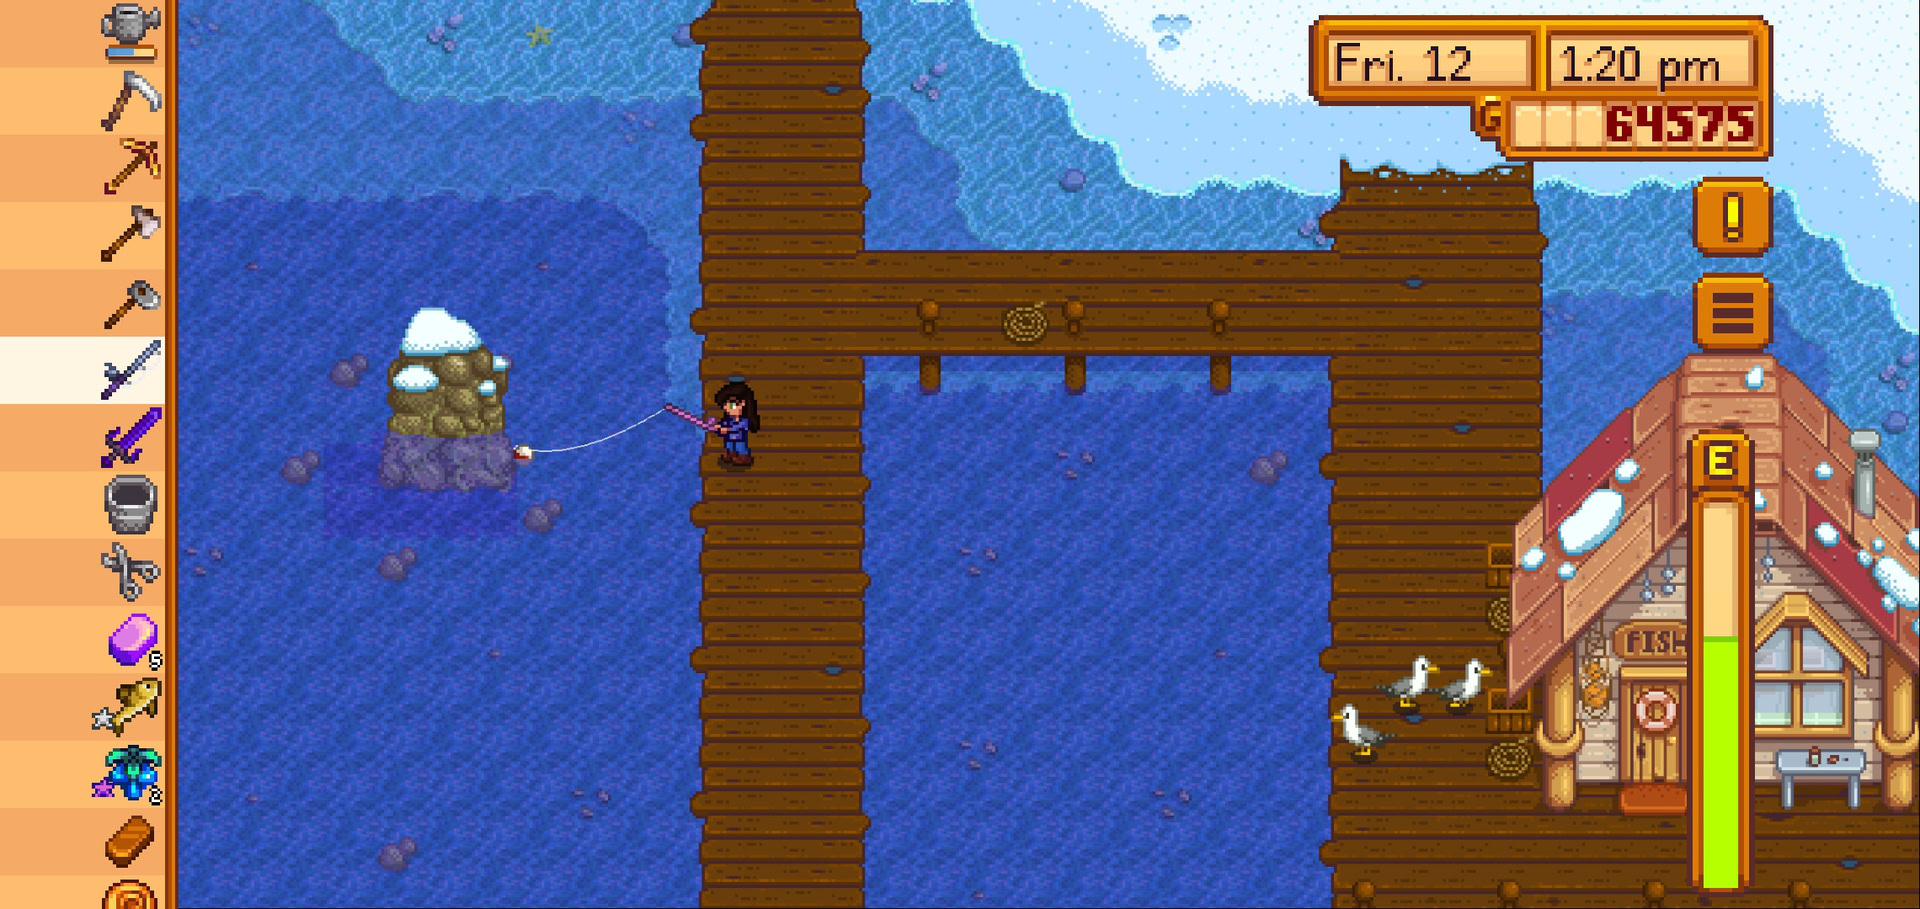 stardew valley community center fishing guide